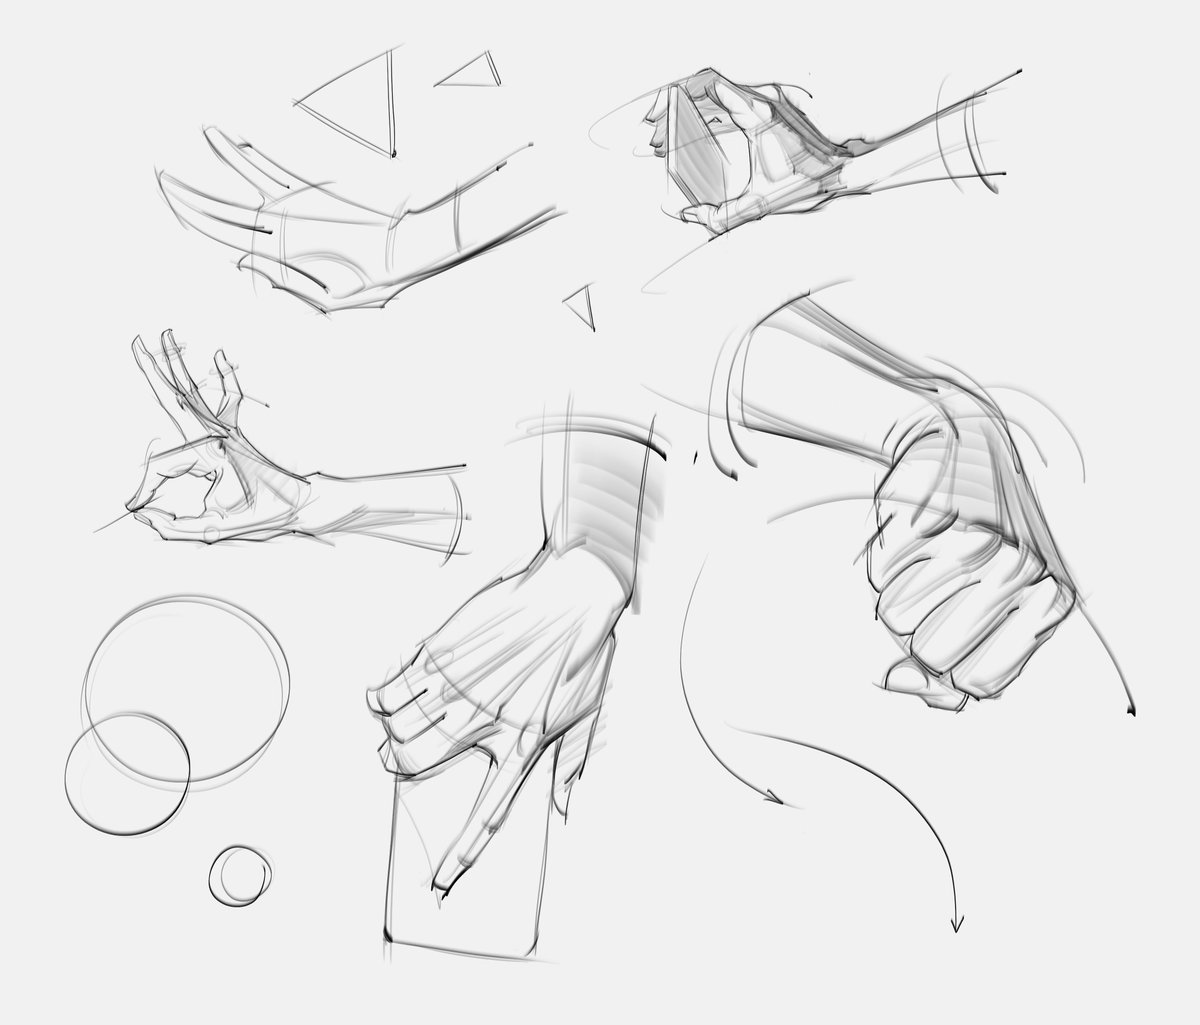 Morning hand gestures! #gottogetbetter #drawing #sketching #humananatomy #anatomy #sketches #fingers #palm #wrist #knuckles #handposes #lineart #thumb #gesturedrawing #shading #fist #goals #drawingtips